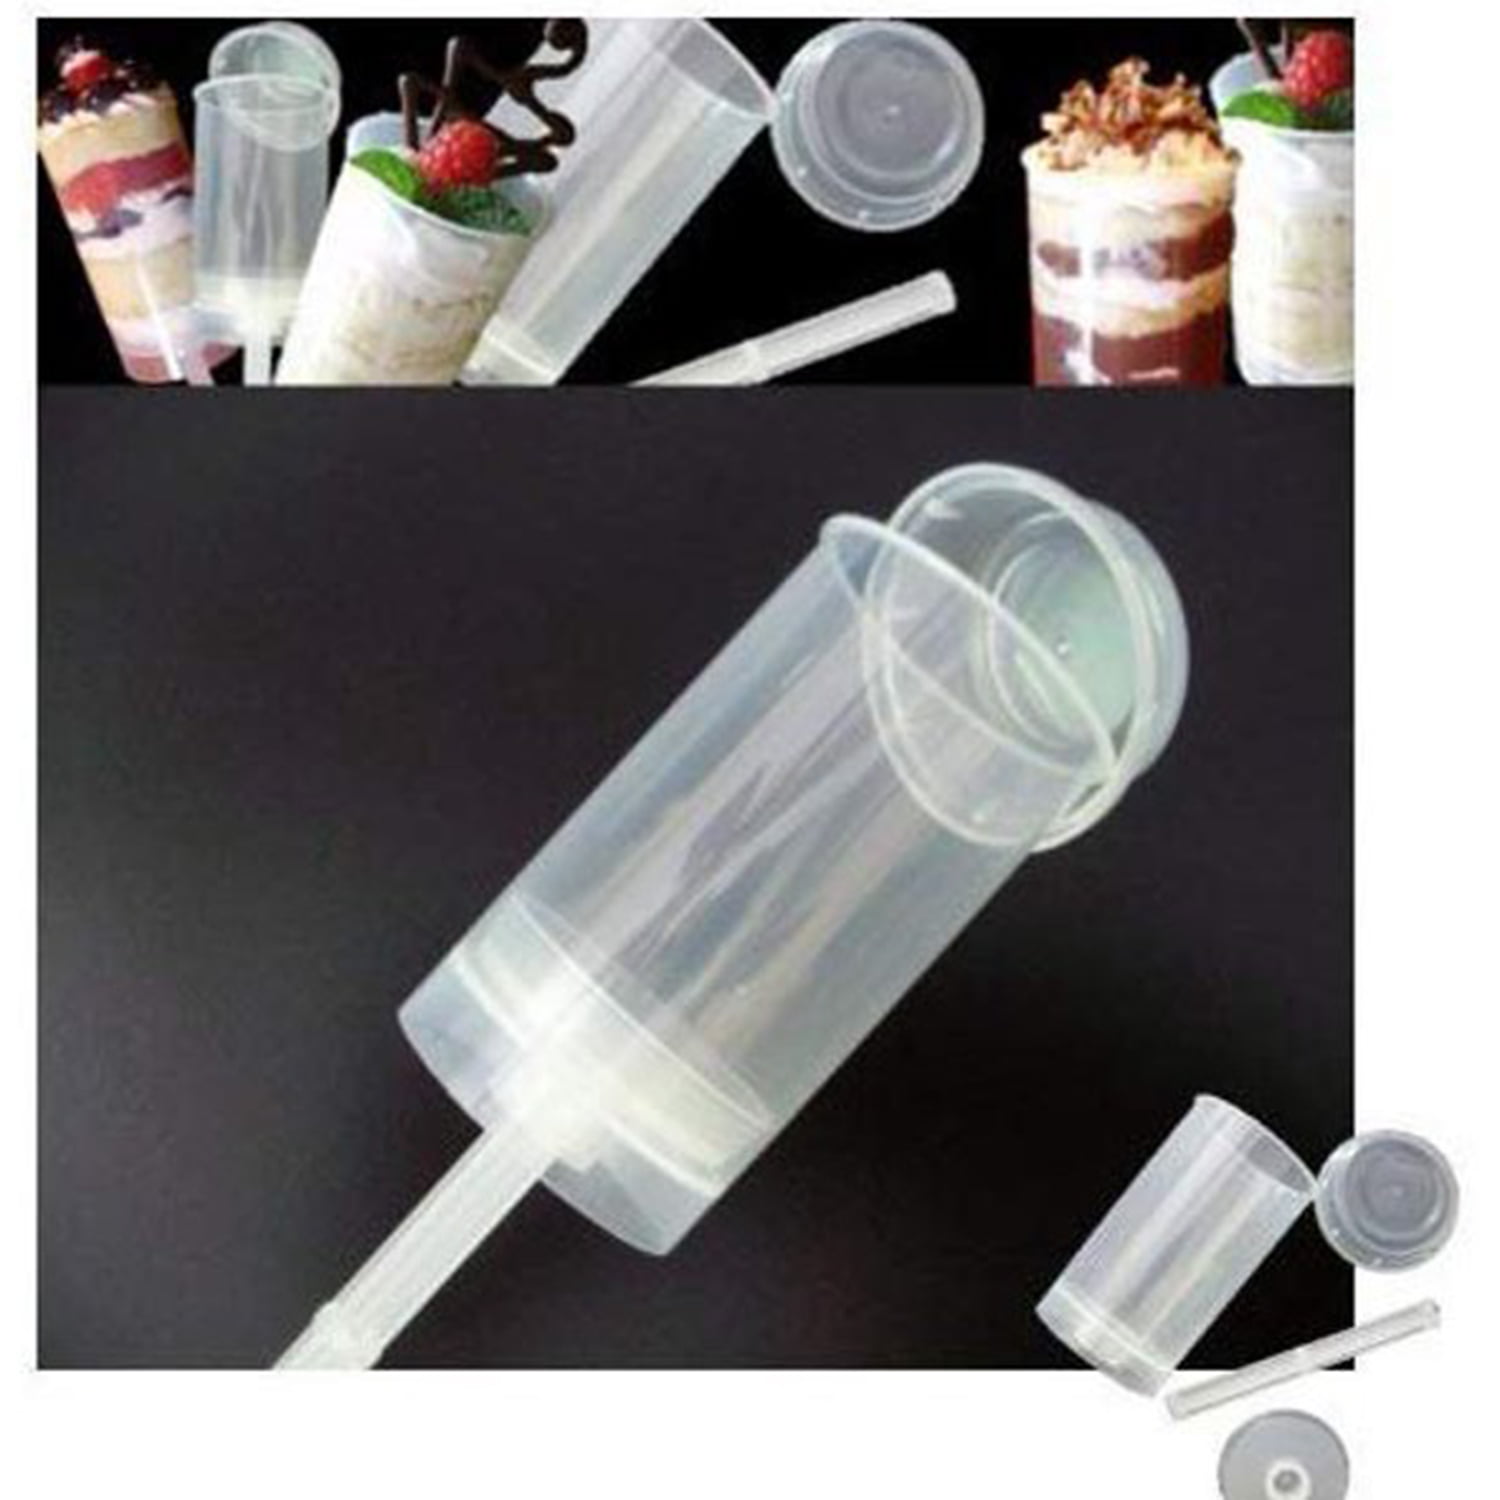 10pcs Cake Push Up Pop Container Holders Pops Birthday Party Moulds Kitchen Tool 